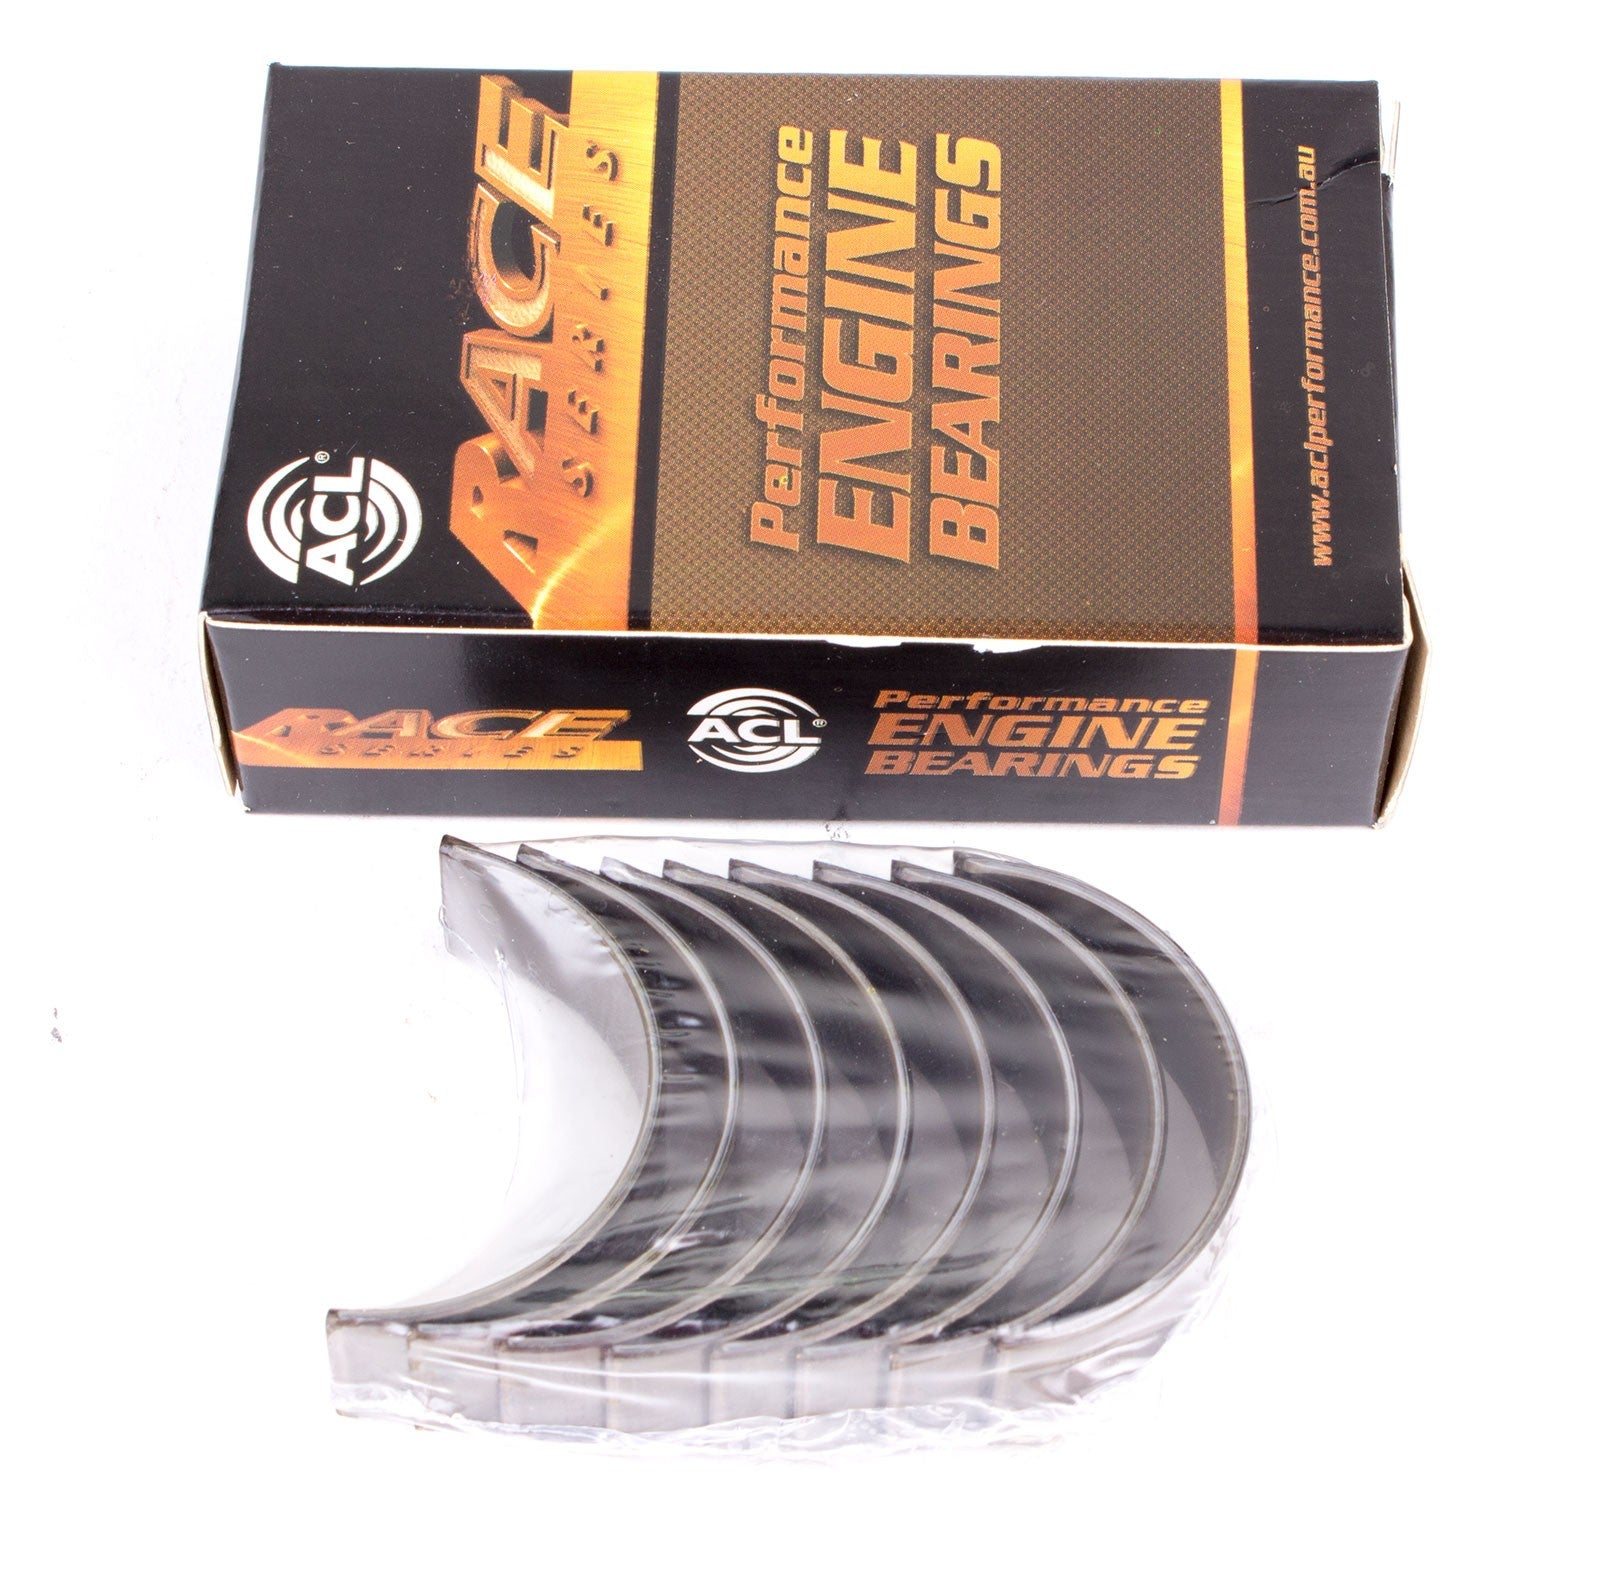 ACL 5M590H-09 Main bearing set (ACL Race Series) Photo-0 